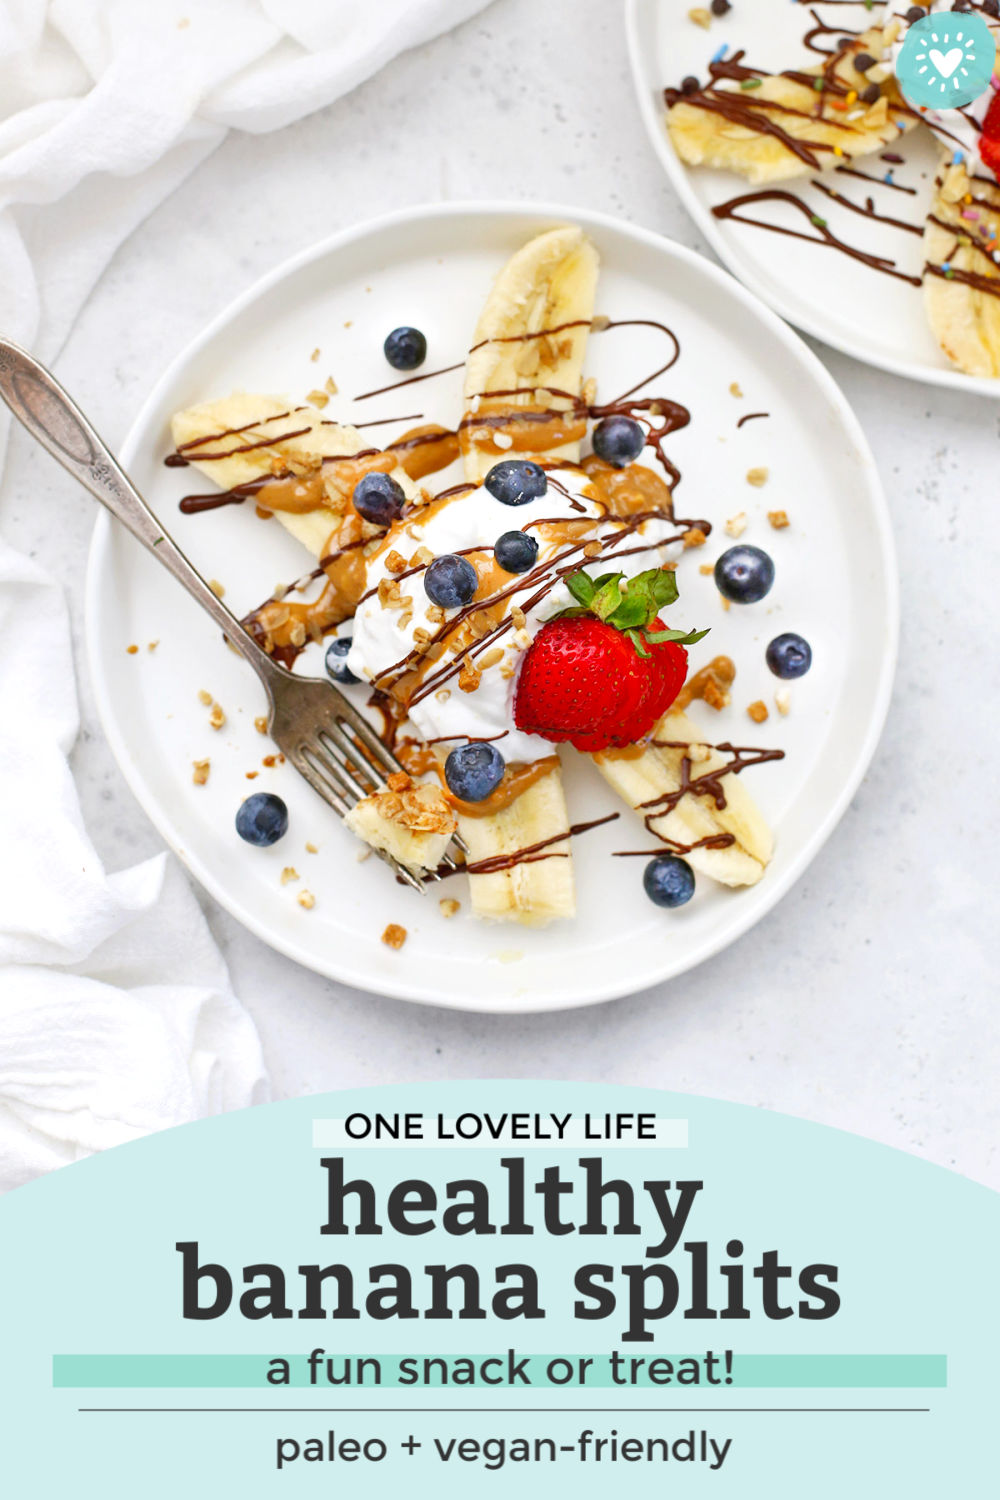 Healthy Banana Split with Yogurt, Peanut Butter, Chocolate, and berries on a white plate with text that reads "One Lovely Life. Healthy Banana Splits--a fun snack or treat! Paleo + vegan-friendly"